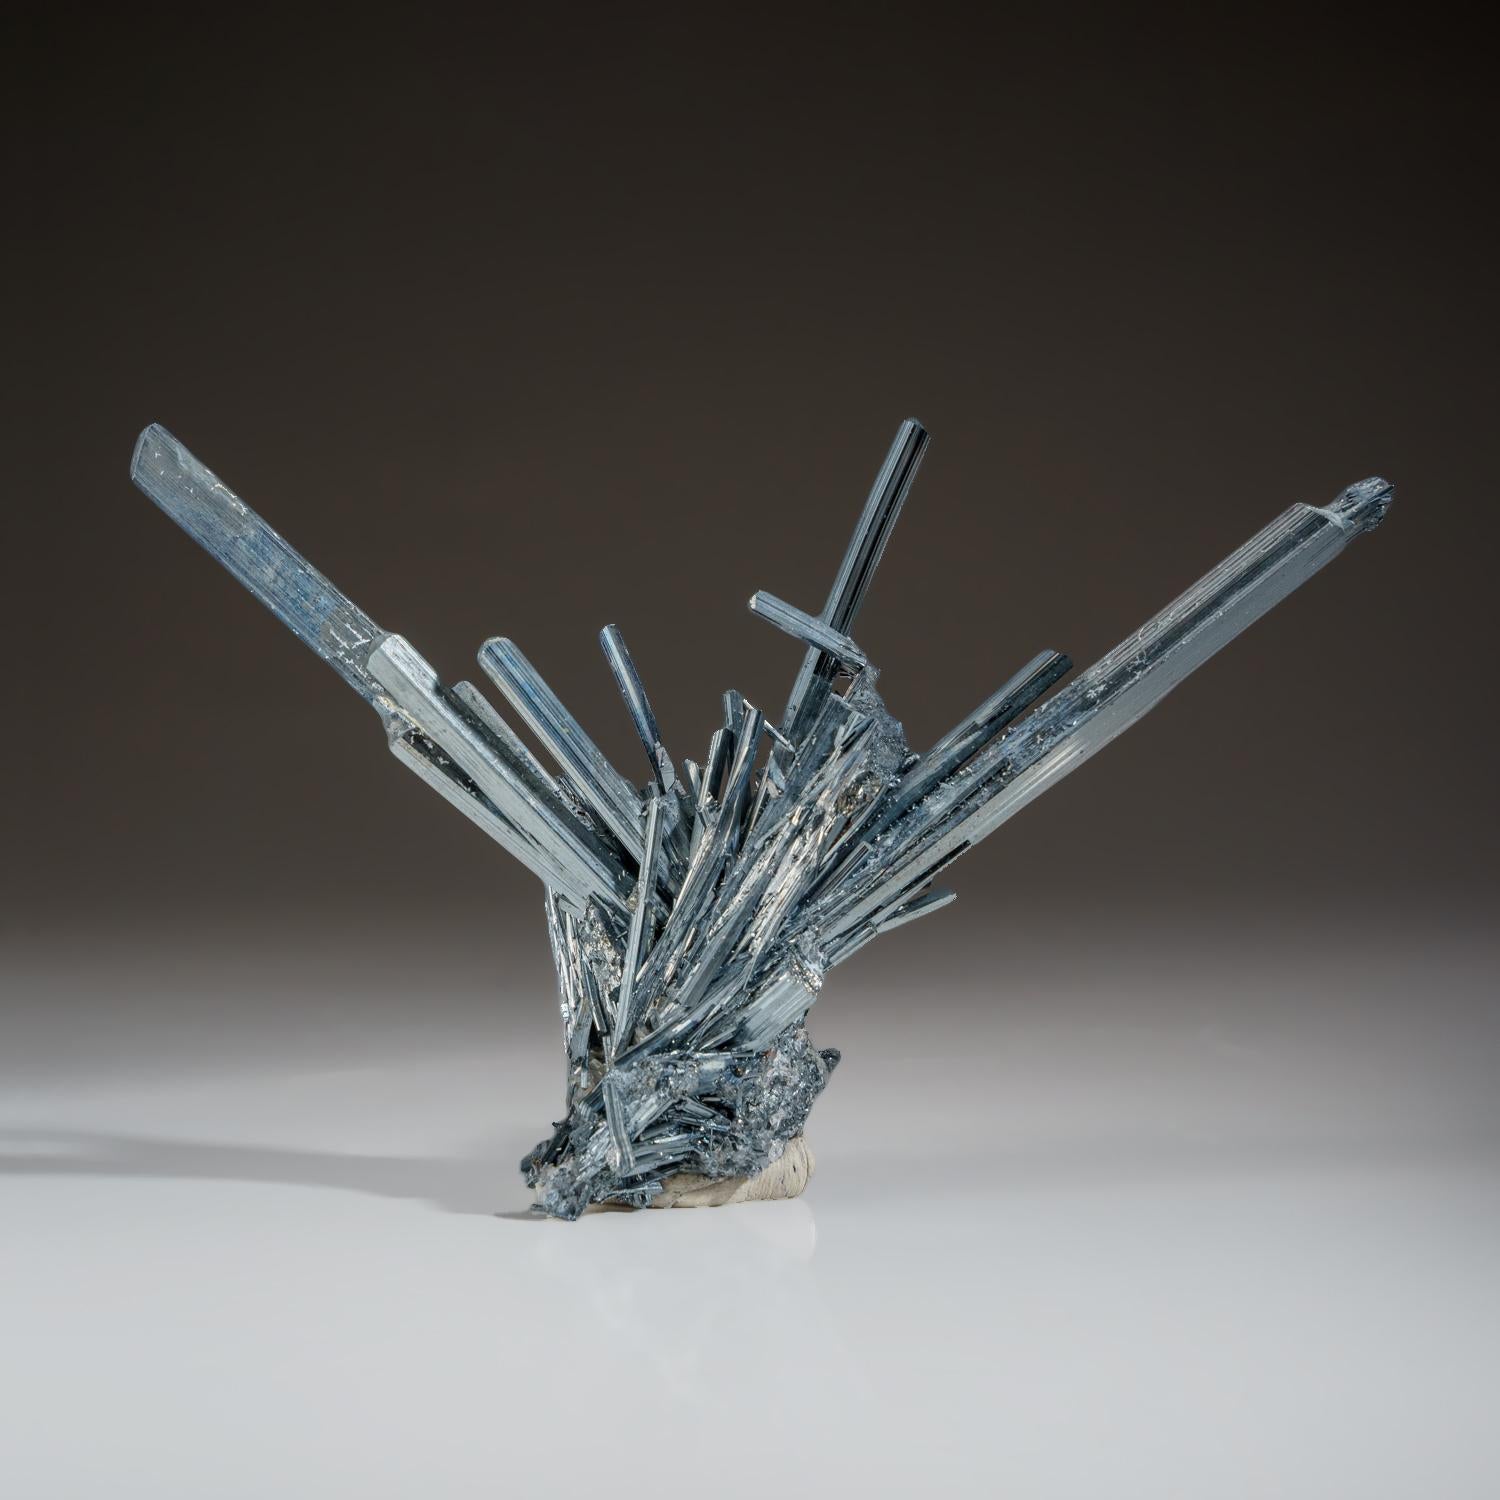 Stibnite from Wuling antimony mine, Qingjiang, Jiangxi, China Superb museum quality specimen of brilliant metallic luster stibnite crystals in a radial formation with striated crystal surfaces. All crystals are fully terminated and damage free.